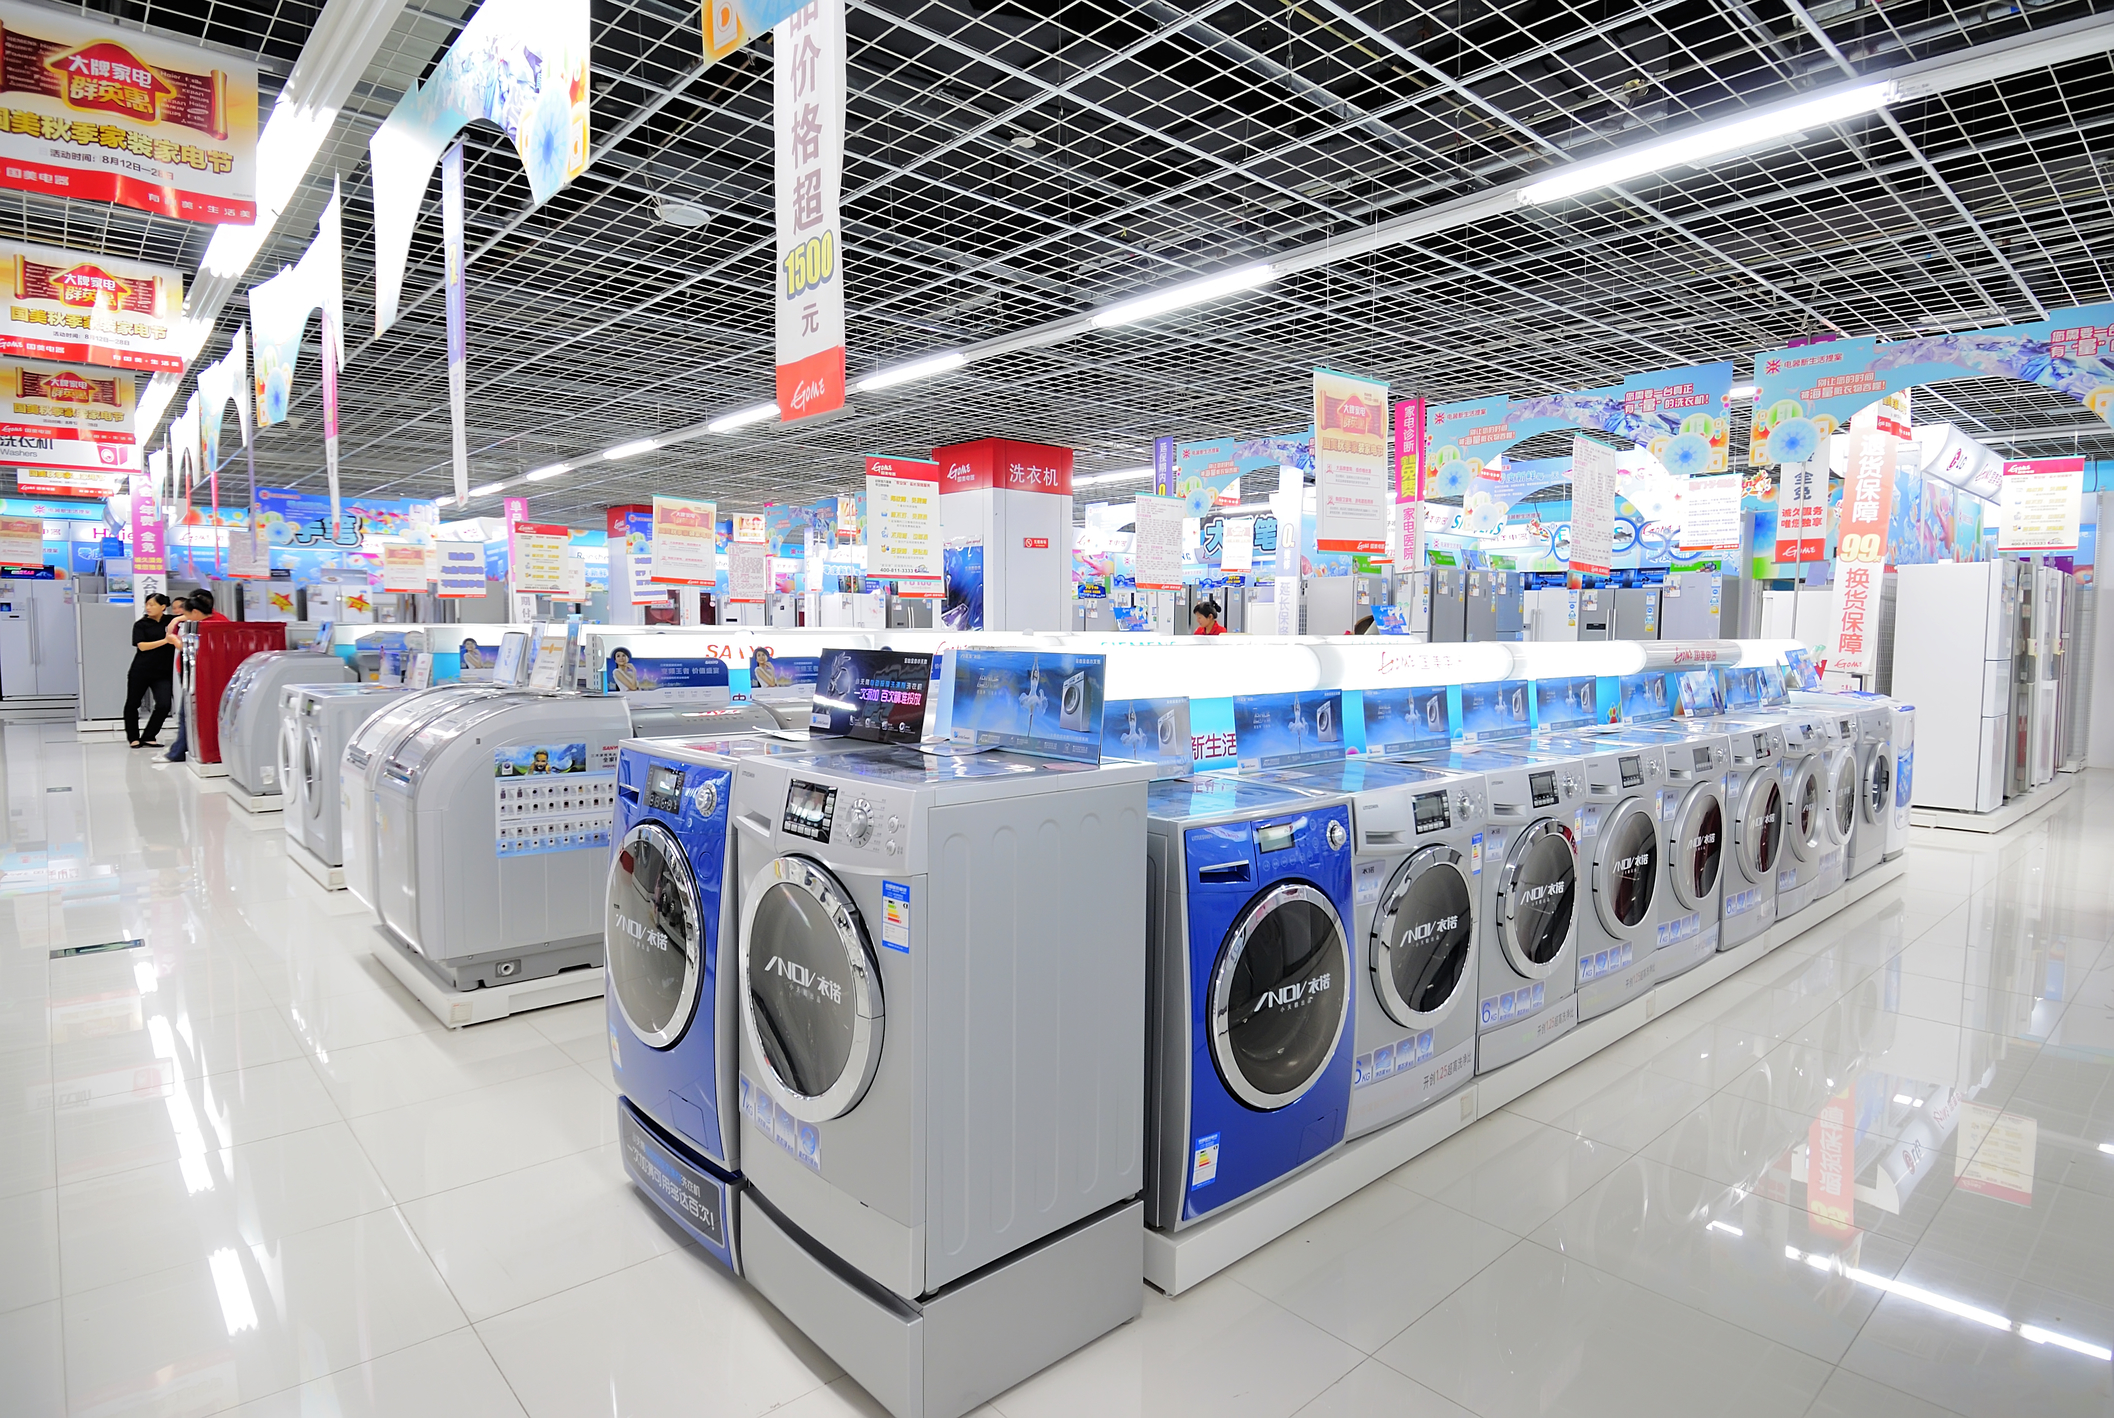 Washing machine prices are expected to rise: Here’s where to grab a deal